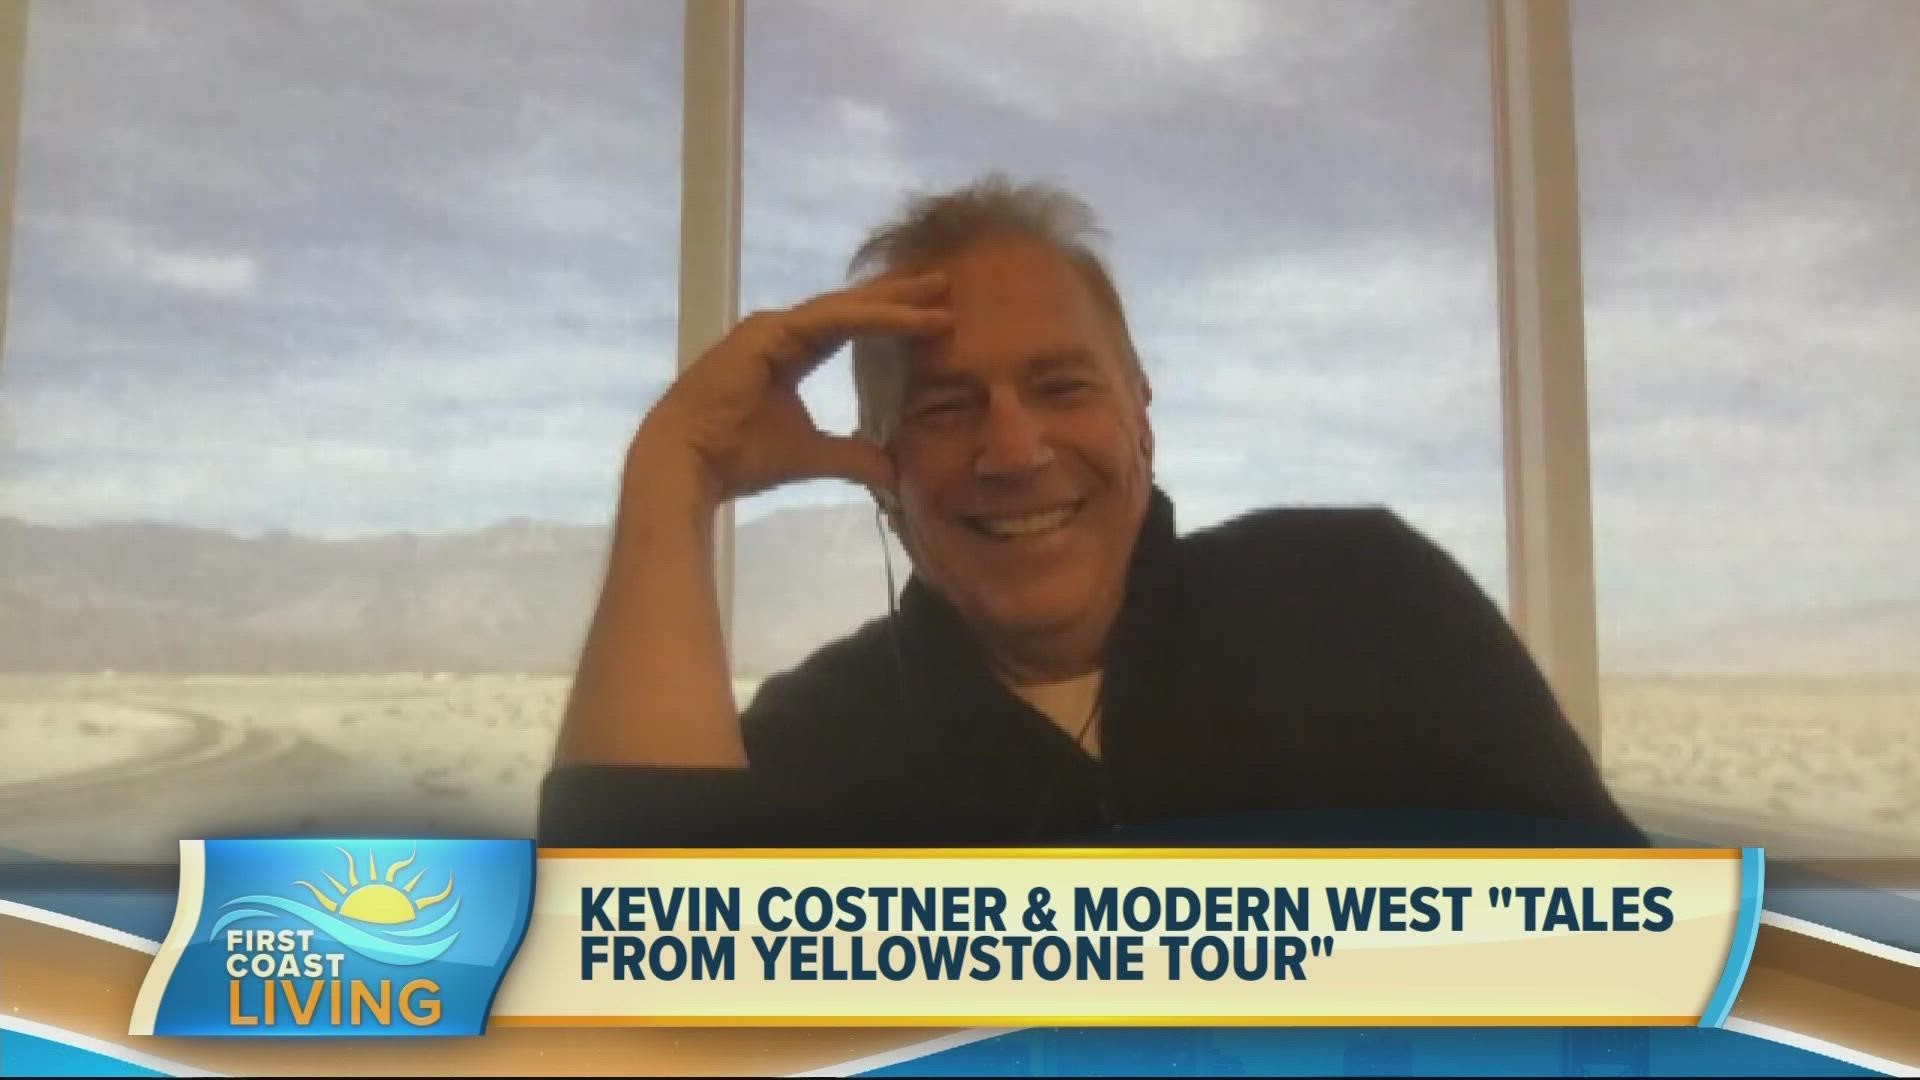 Kevin Costner & Modern West takes "Tales from Yellowstone Tour" to St. Augustine Amphitheater Monday October 25, 2021 at 7 p.m.